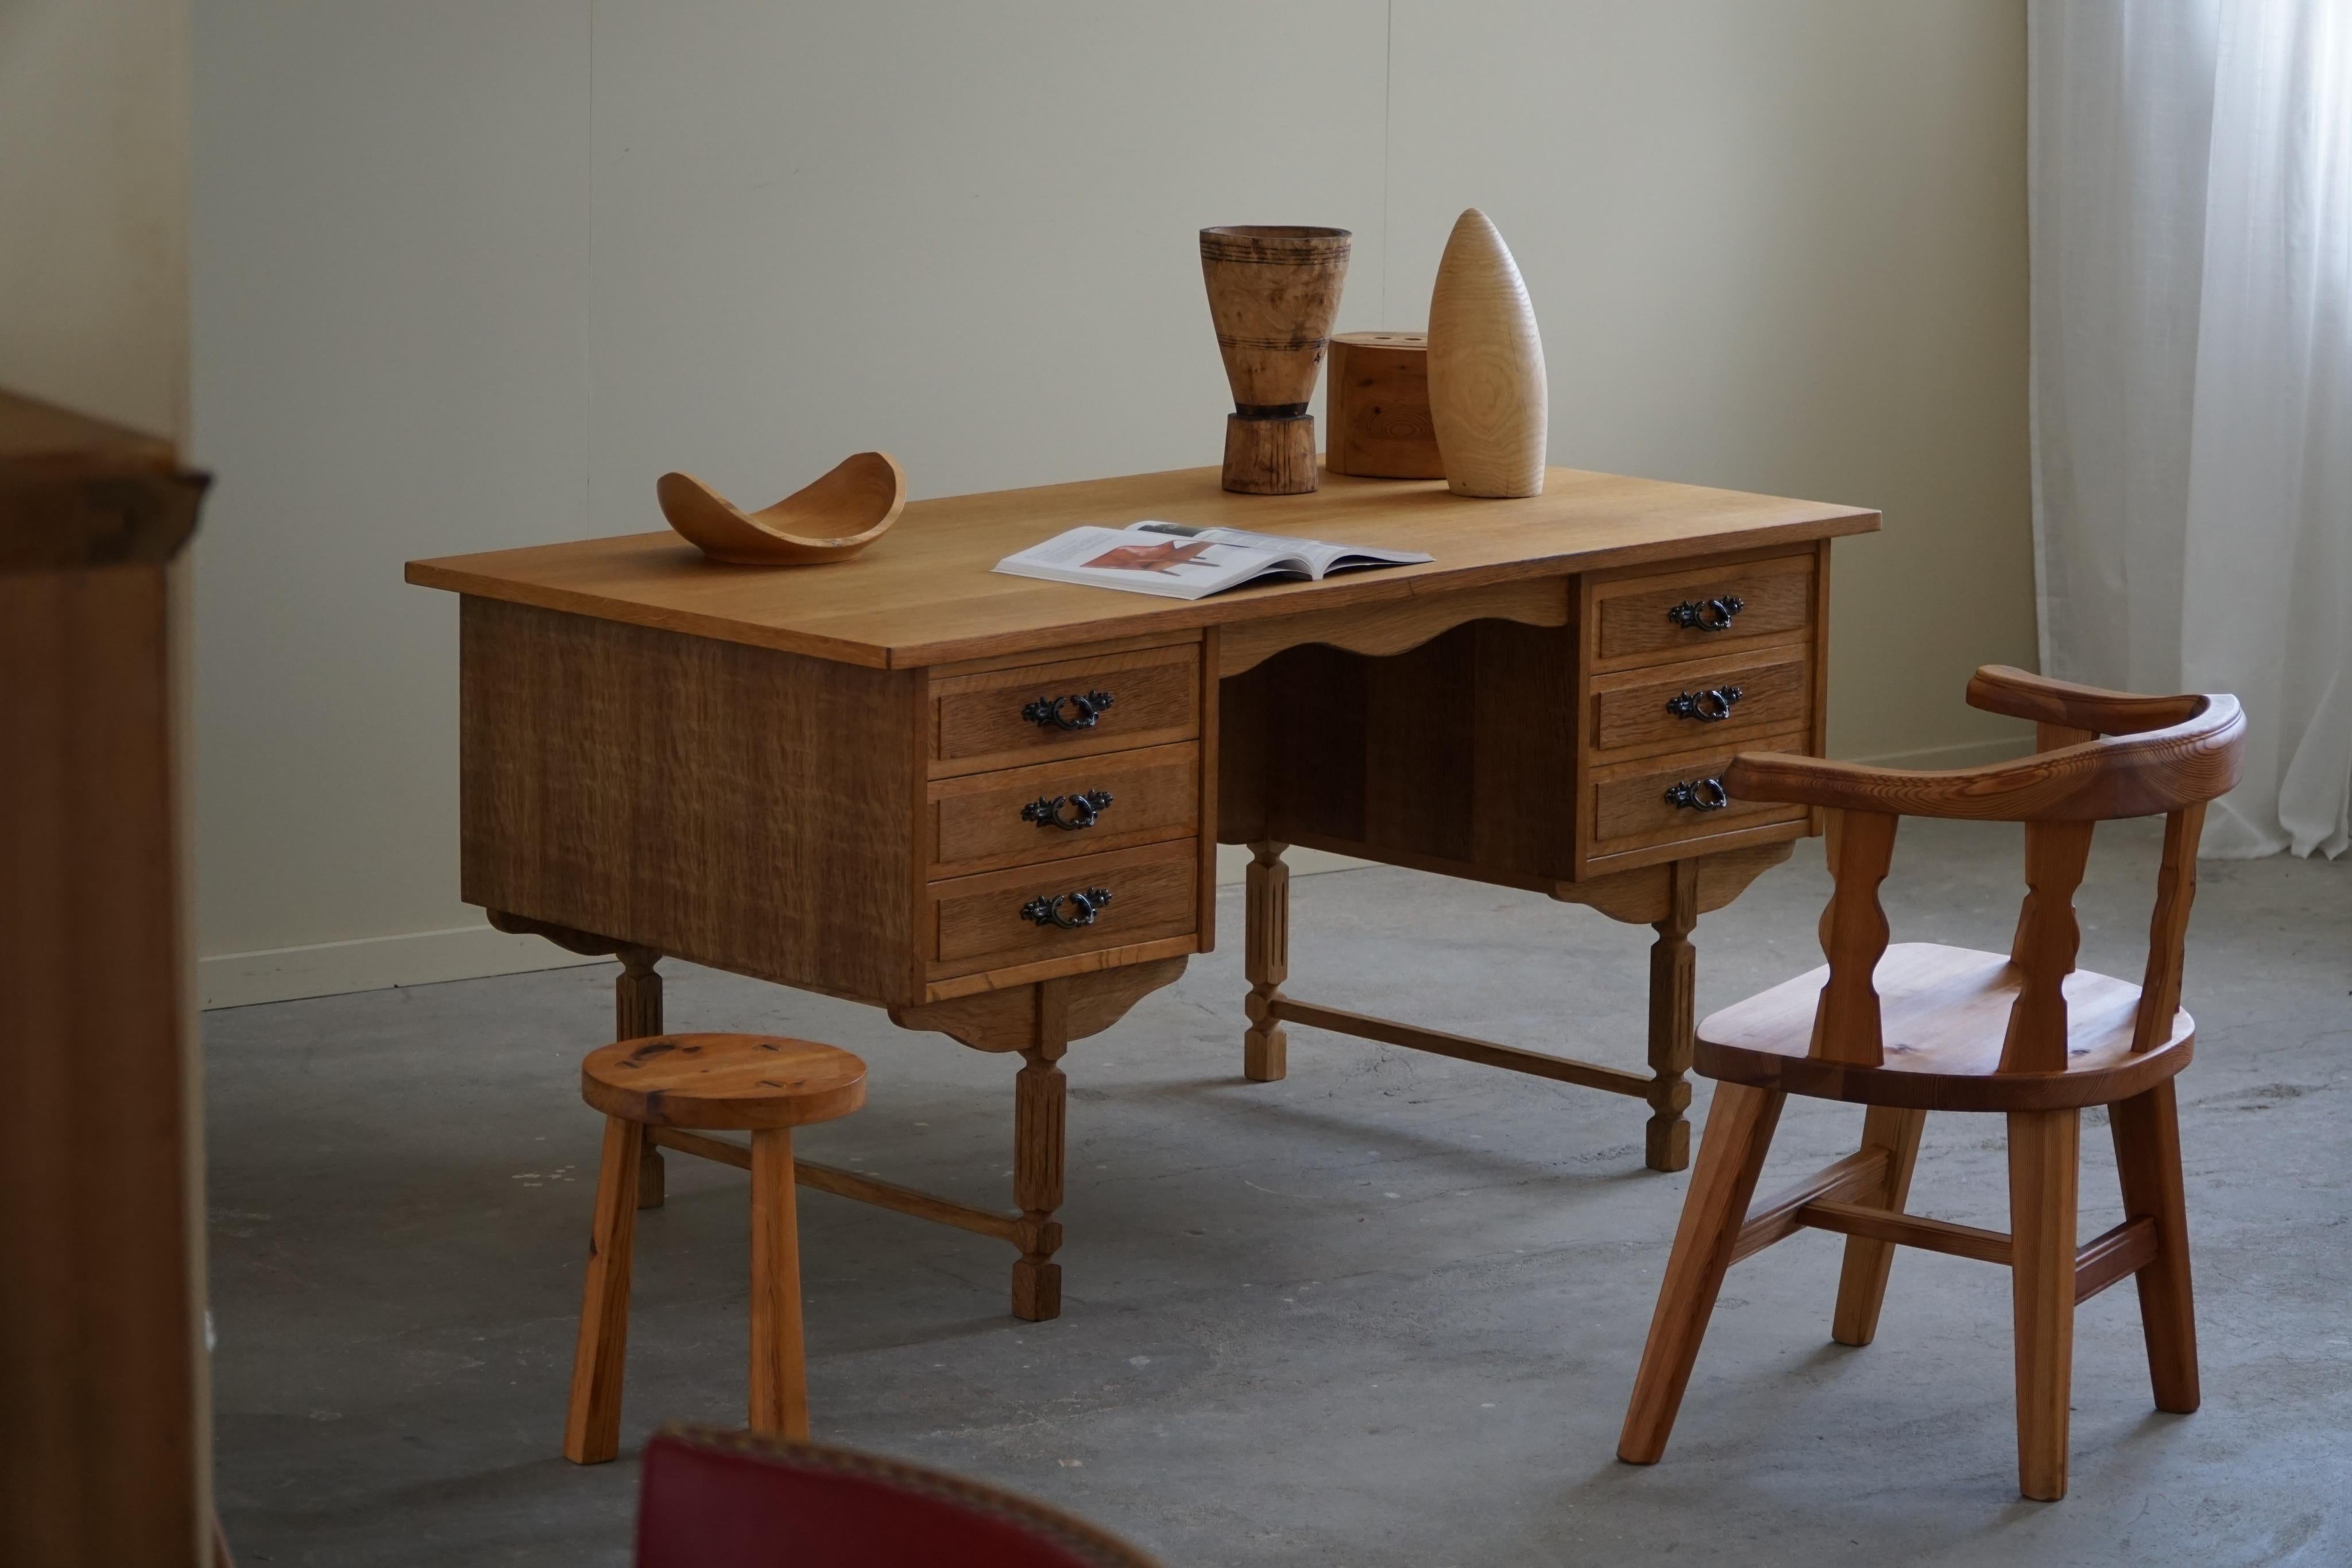 A refined mid-century freestanding desk in solid oak and with brass handles. Made by a Danish cabinetmaker in 1950s.

Nice lines for this perfect office desk. Overall a great impression.
This piece is in a very good vintage condition.
A fine